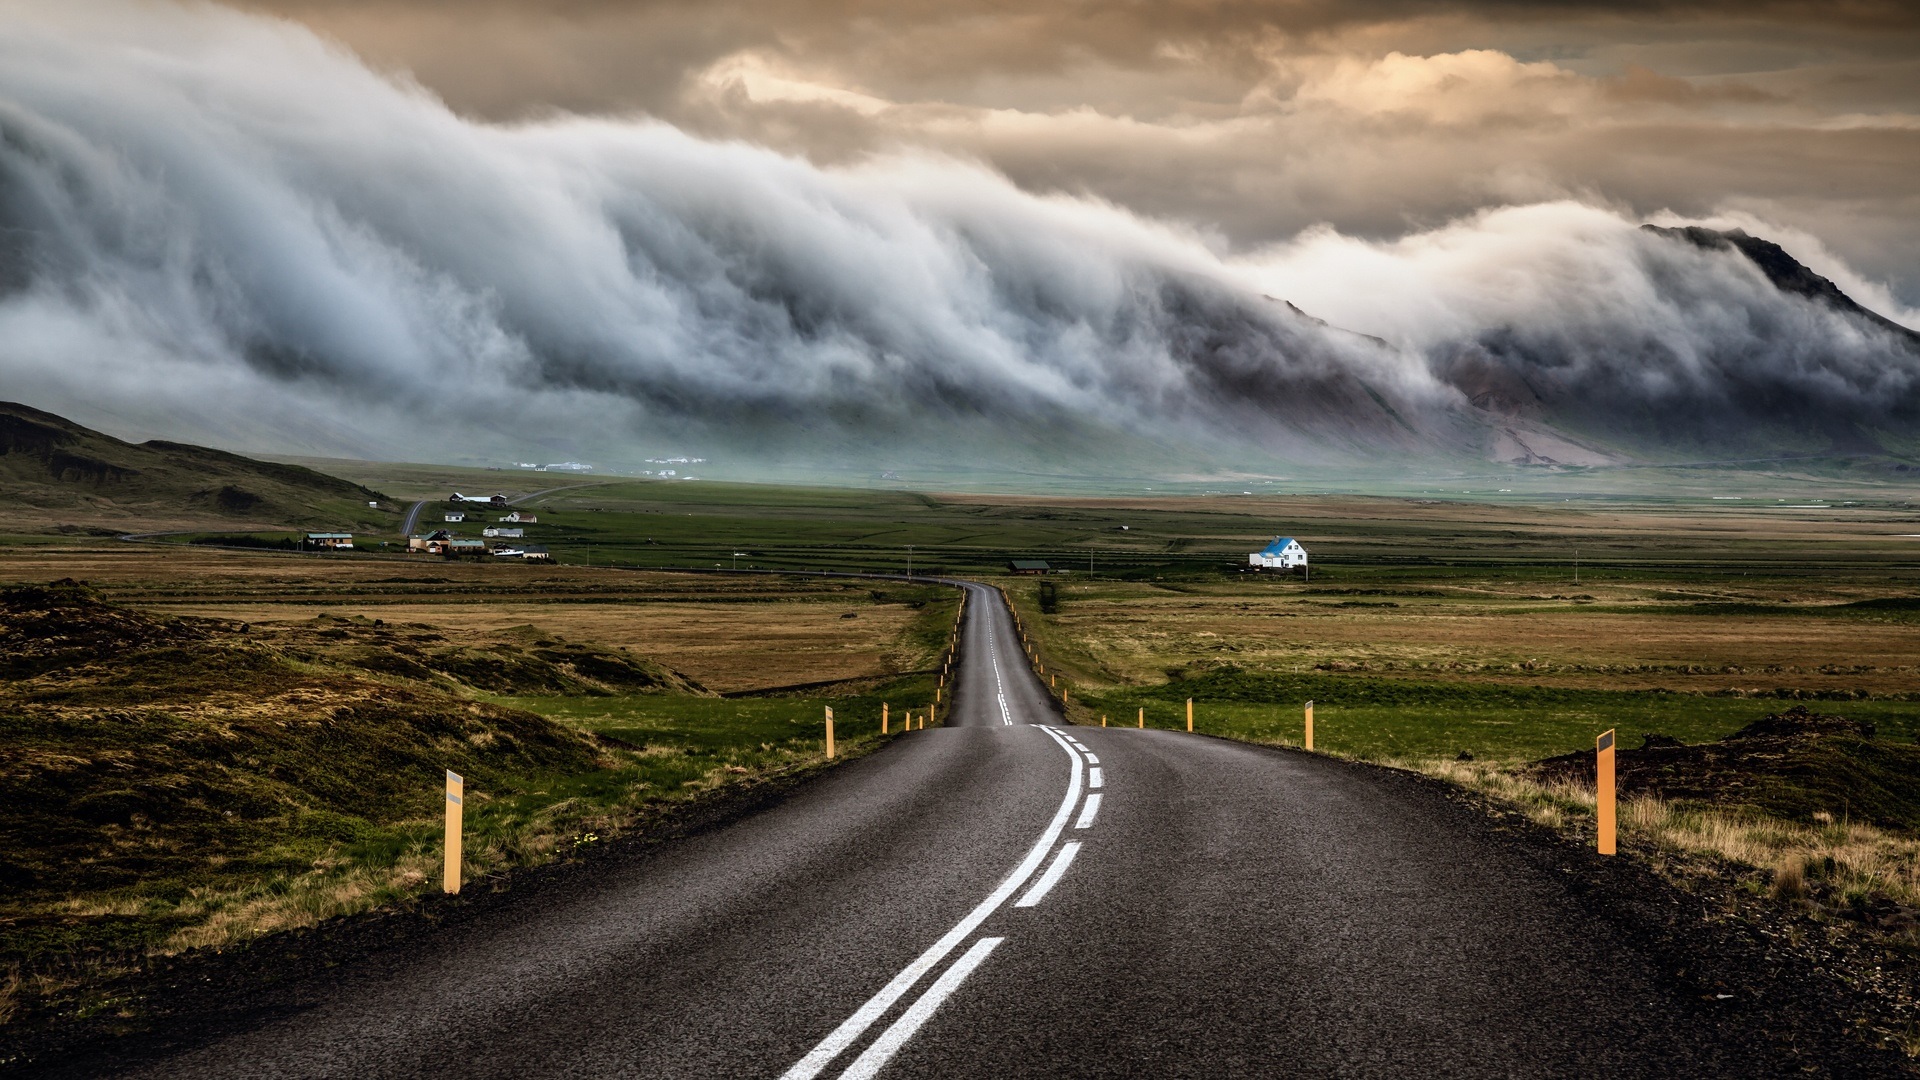 Road Clouds Grass Nature House Building Asphalt Sky Hills Field Road Sign Mountains Photography 1920x1080